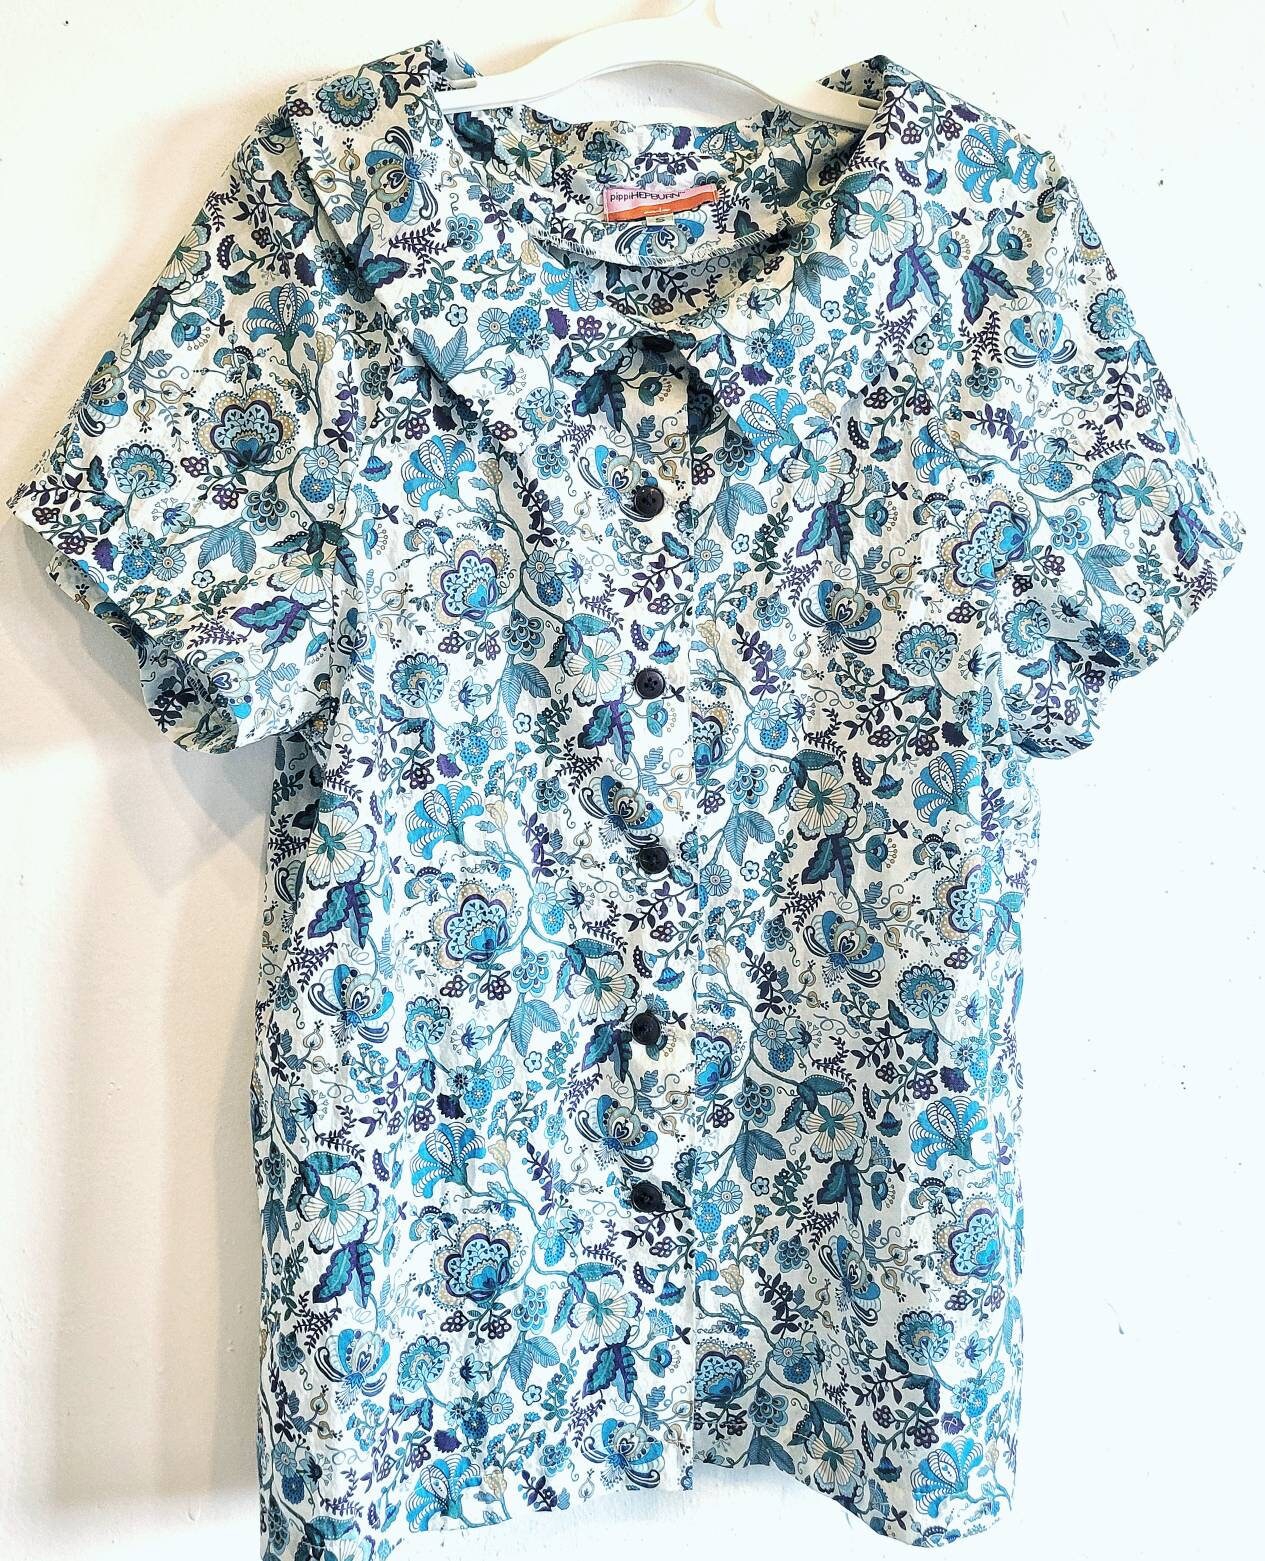 Womens Blouse, Womens Floral Shirt, Womens Short Sleeve Blouse, Womens Top, Womens Vintage Inspired Top, Donna Top